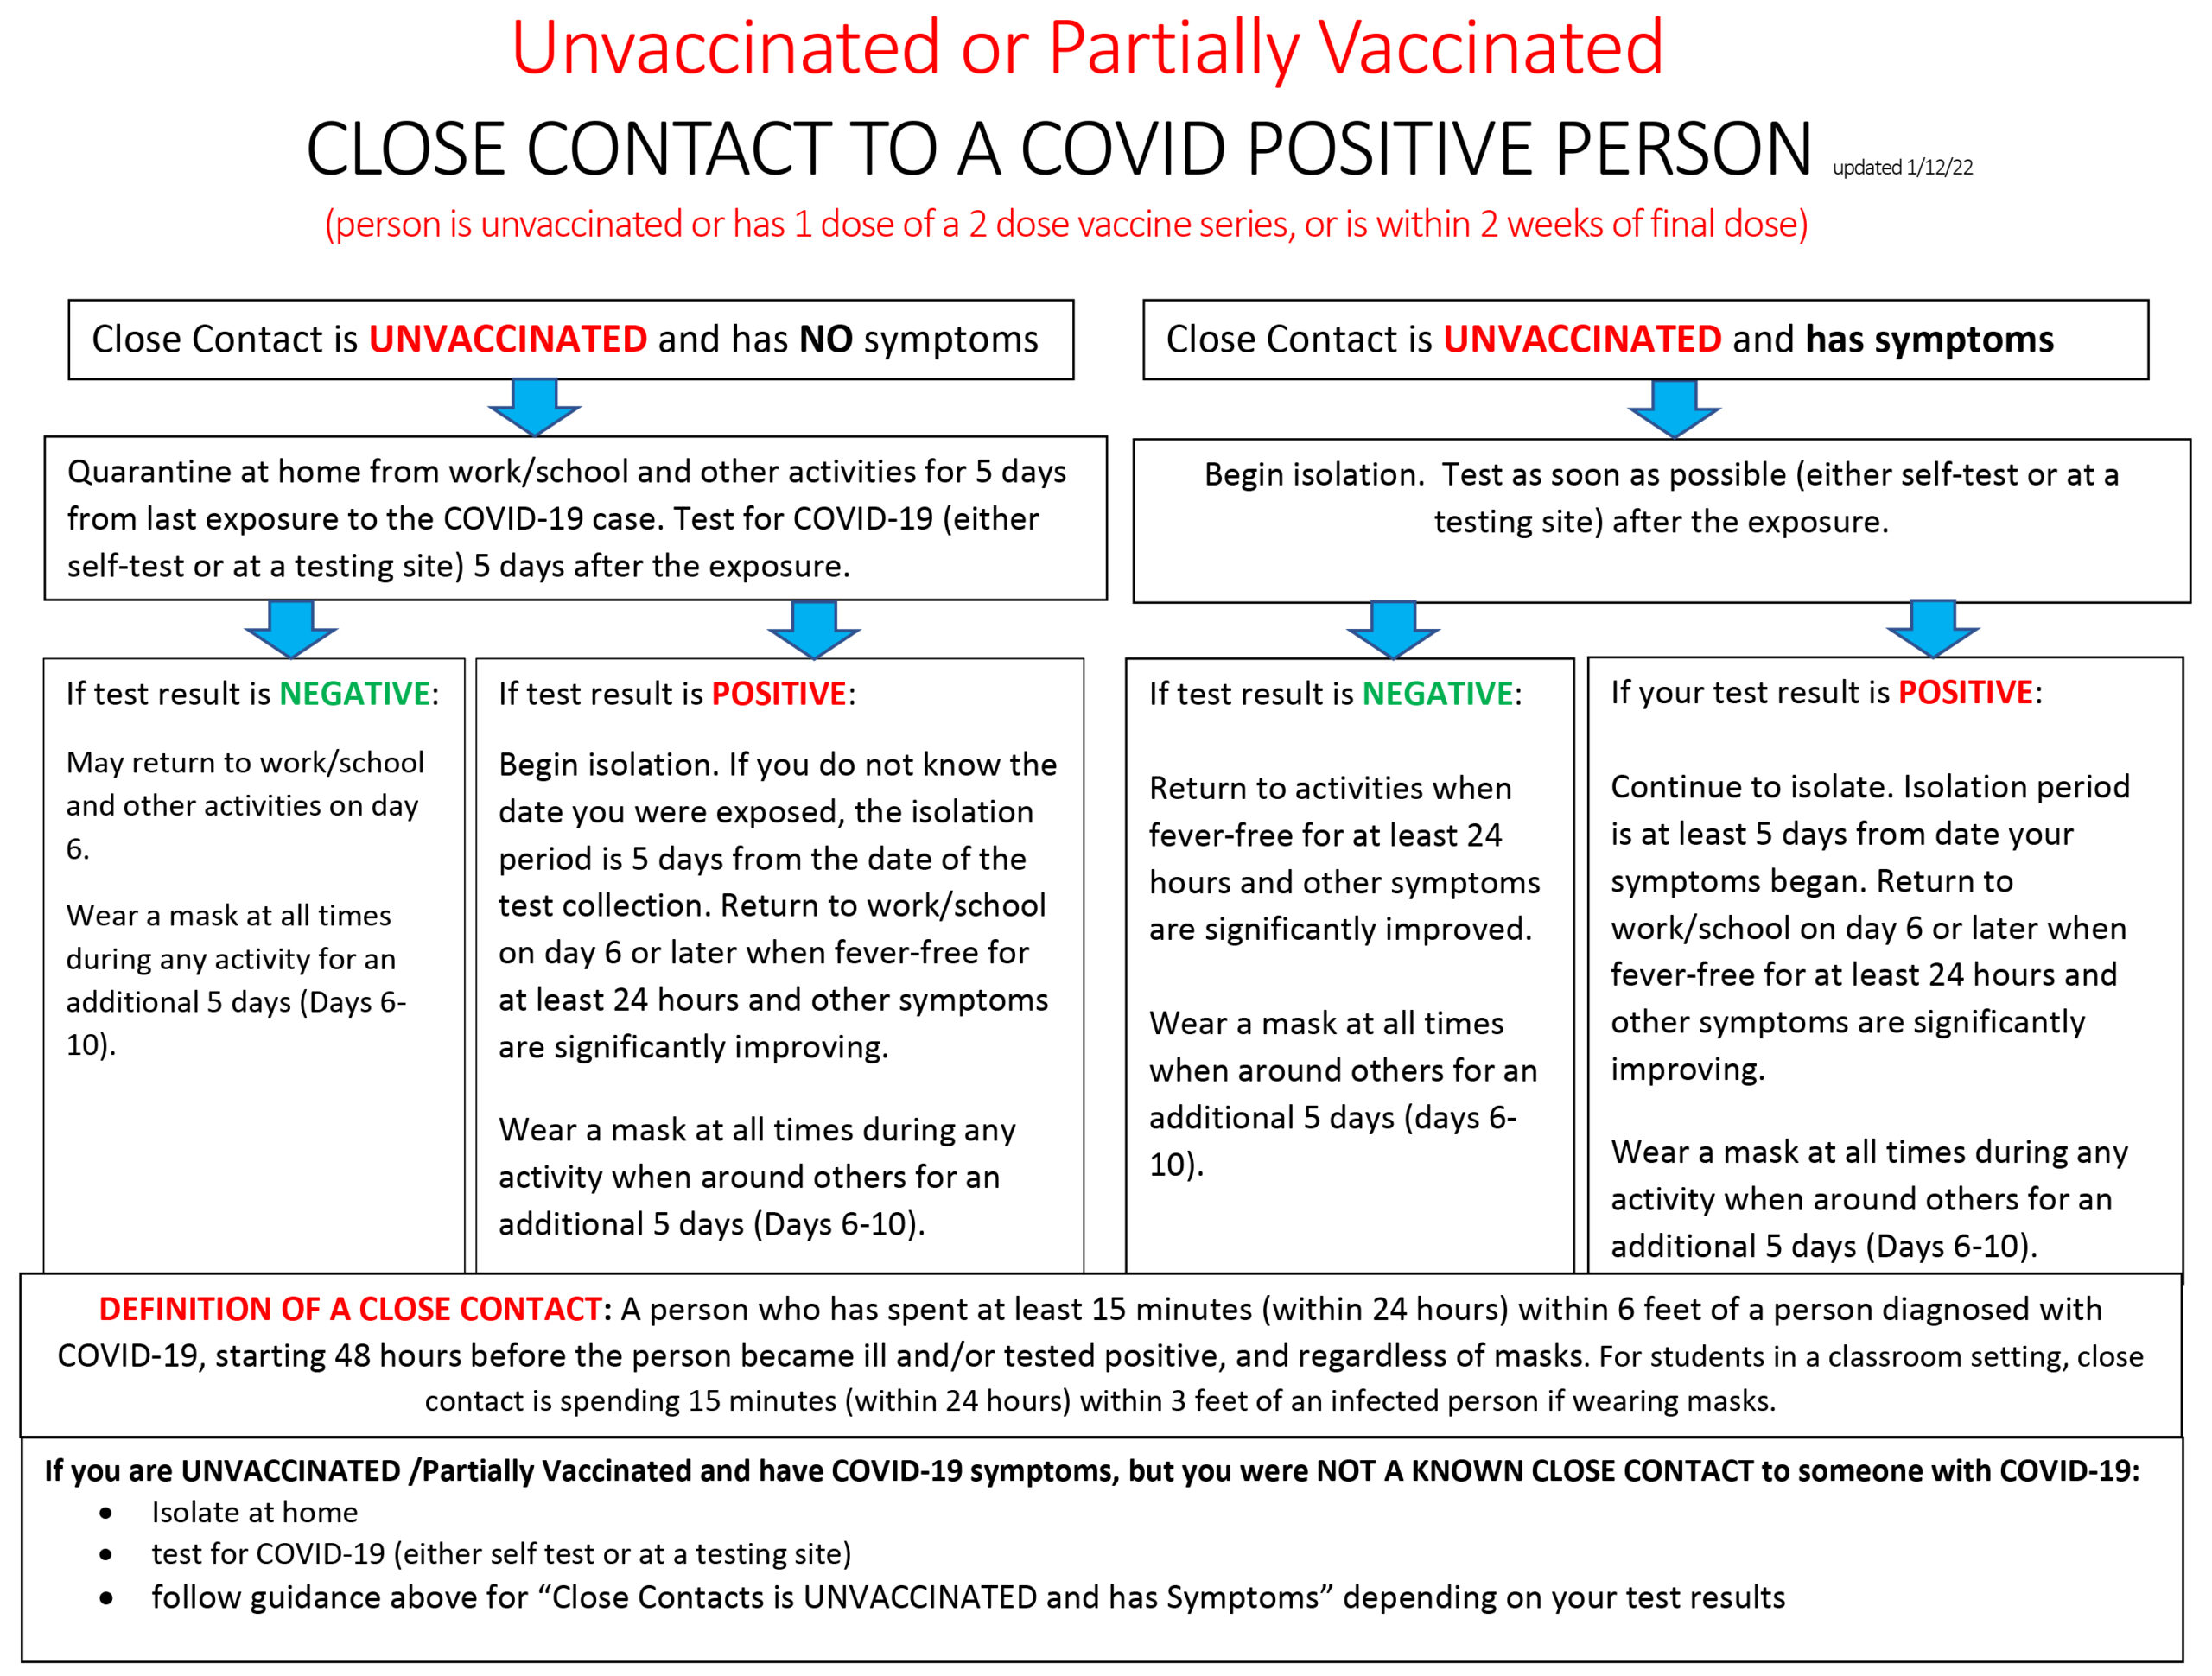 Microsoft Word - UnVac-updated 1-12-22 CLOSE CONTACT TO A COVID